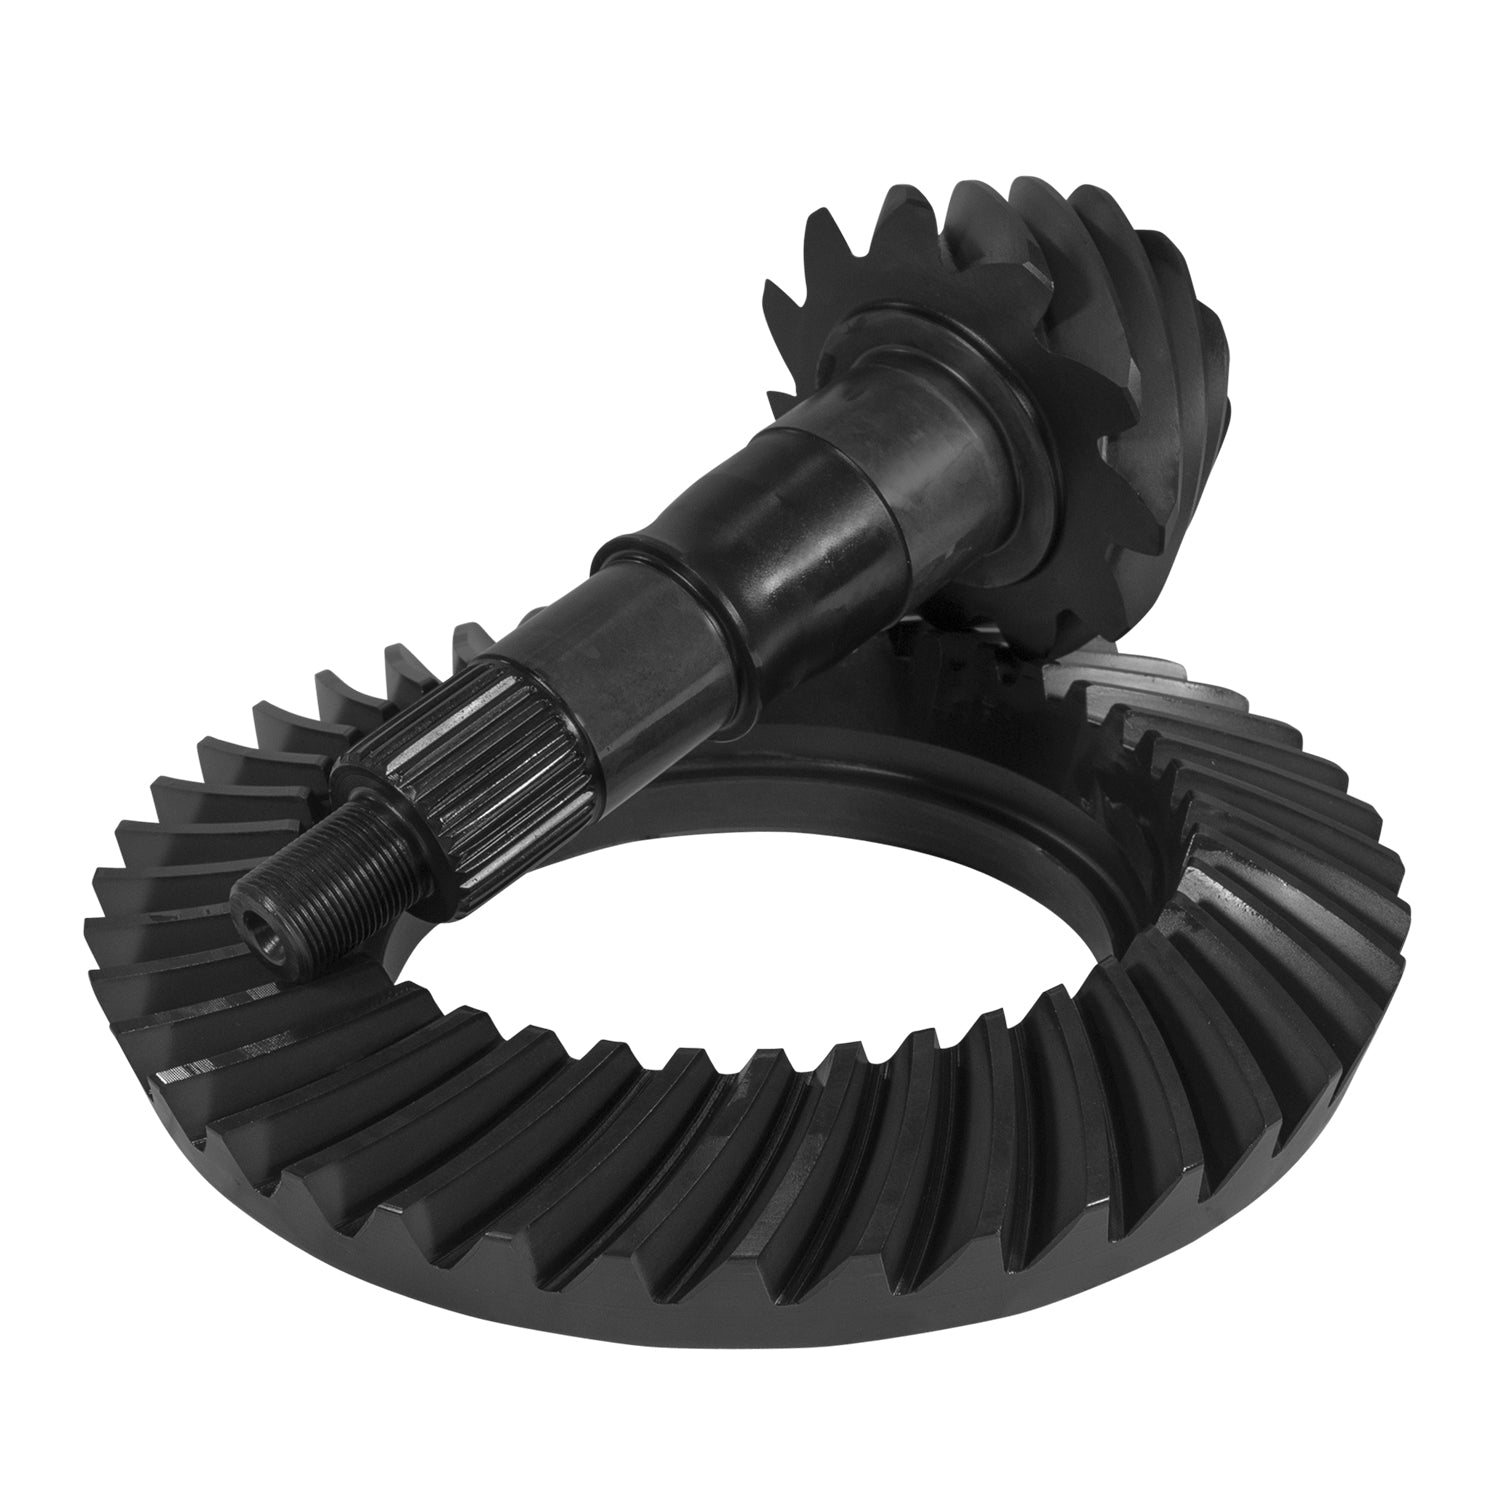 Yukon Gear Ford Lincoln Mercury Differential Ring and Pinion Kit - Rear YGK2382